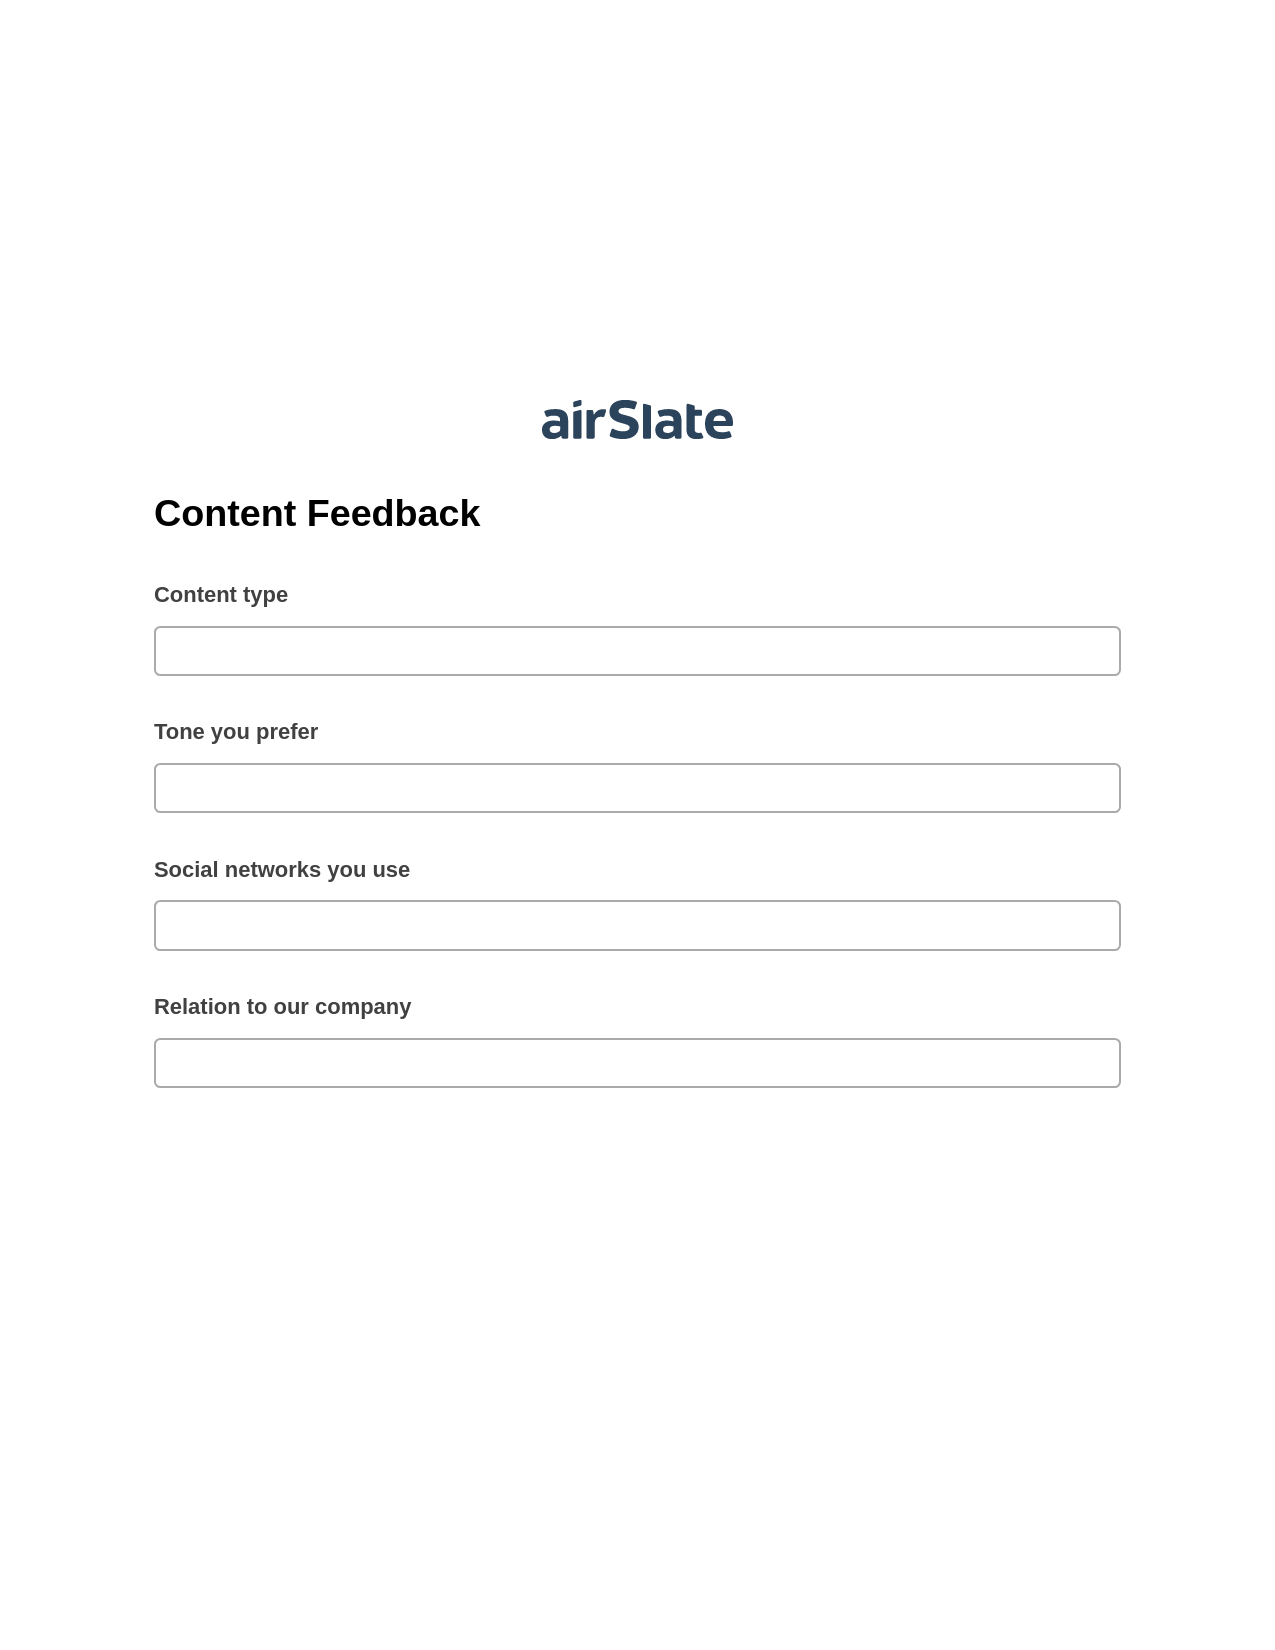 Content Feedback Pre-fill Dropdown from Airtable, Update Salesforce Record Bot, Archive to SharePoint Folder Bot